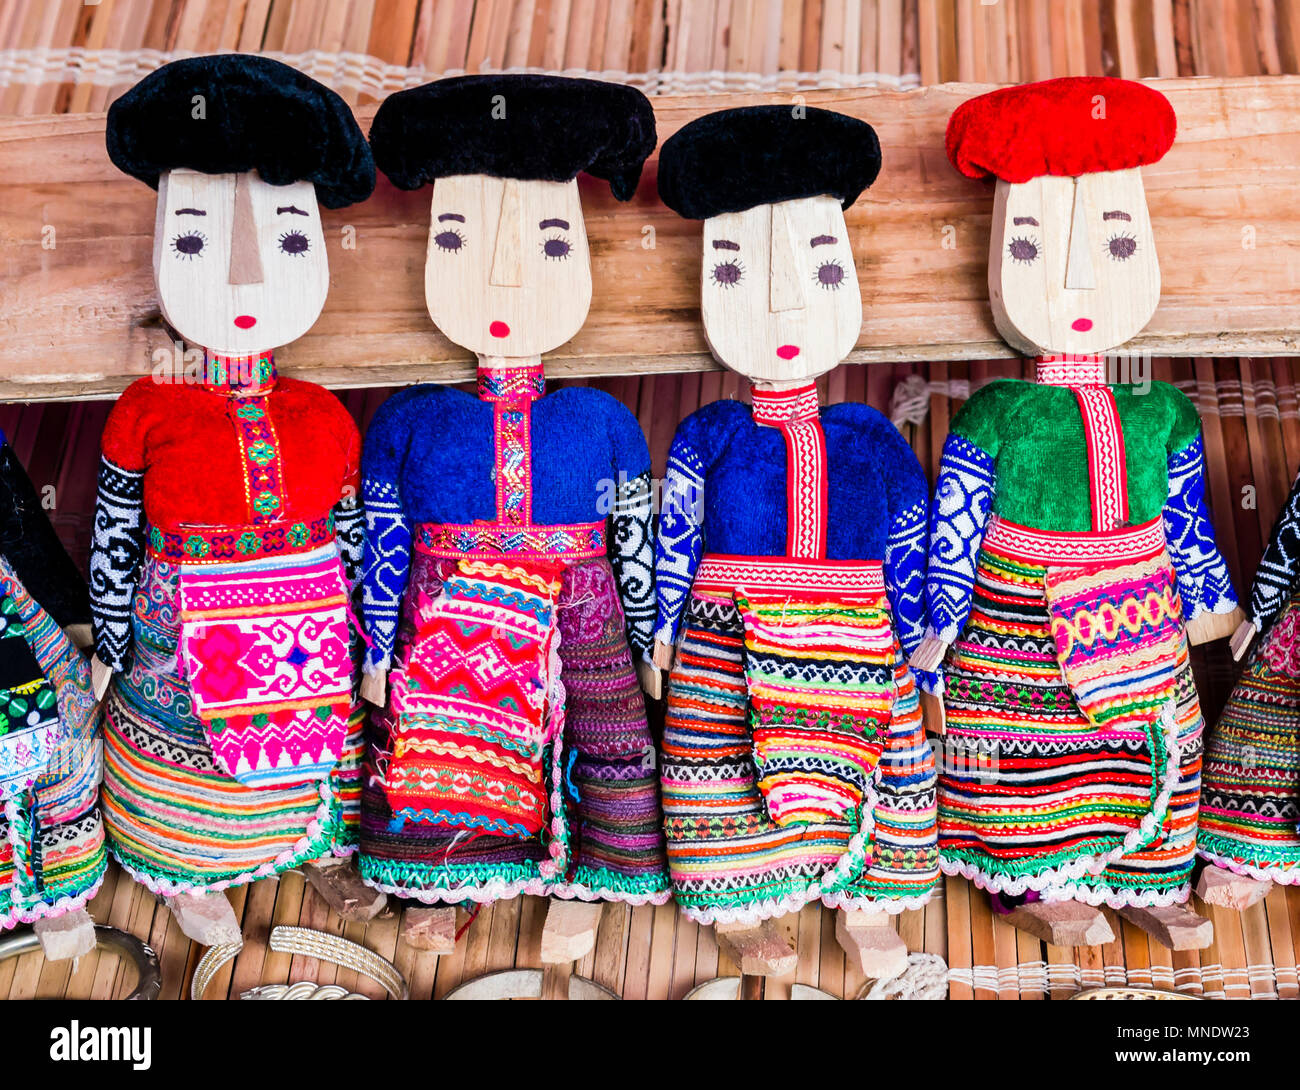 Row of black and red Dzao wooden dolls wearing traditional clothes, Can Cau market, northern Vietnam Stock Photo